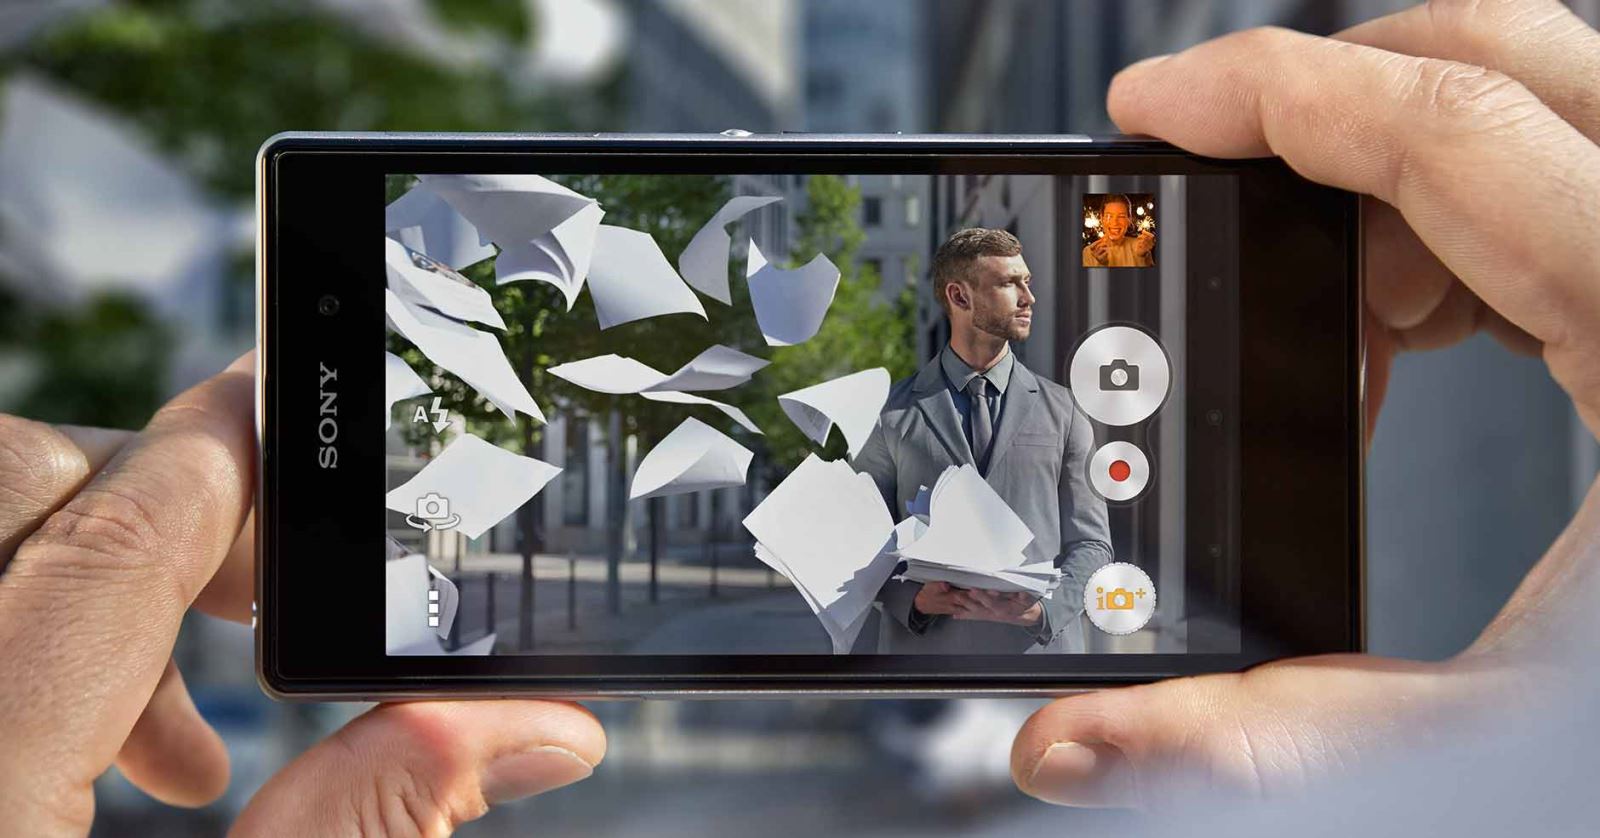 xperia-z1-features-camera-examples-zoom-1880x985